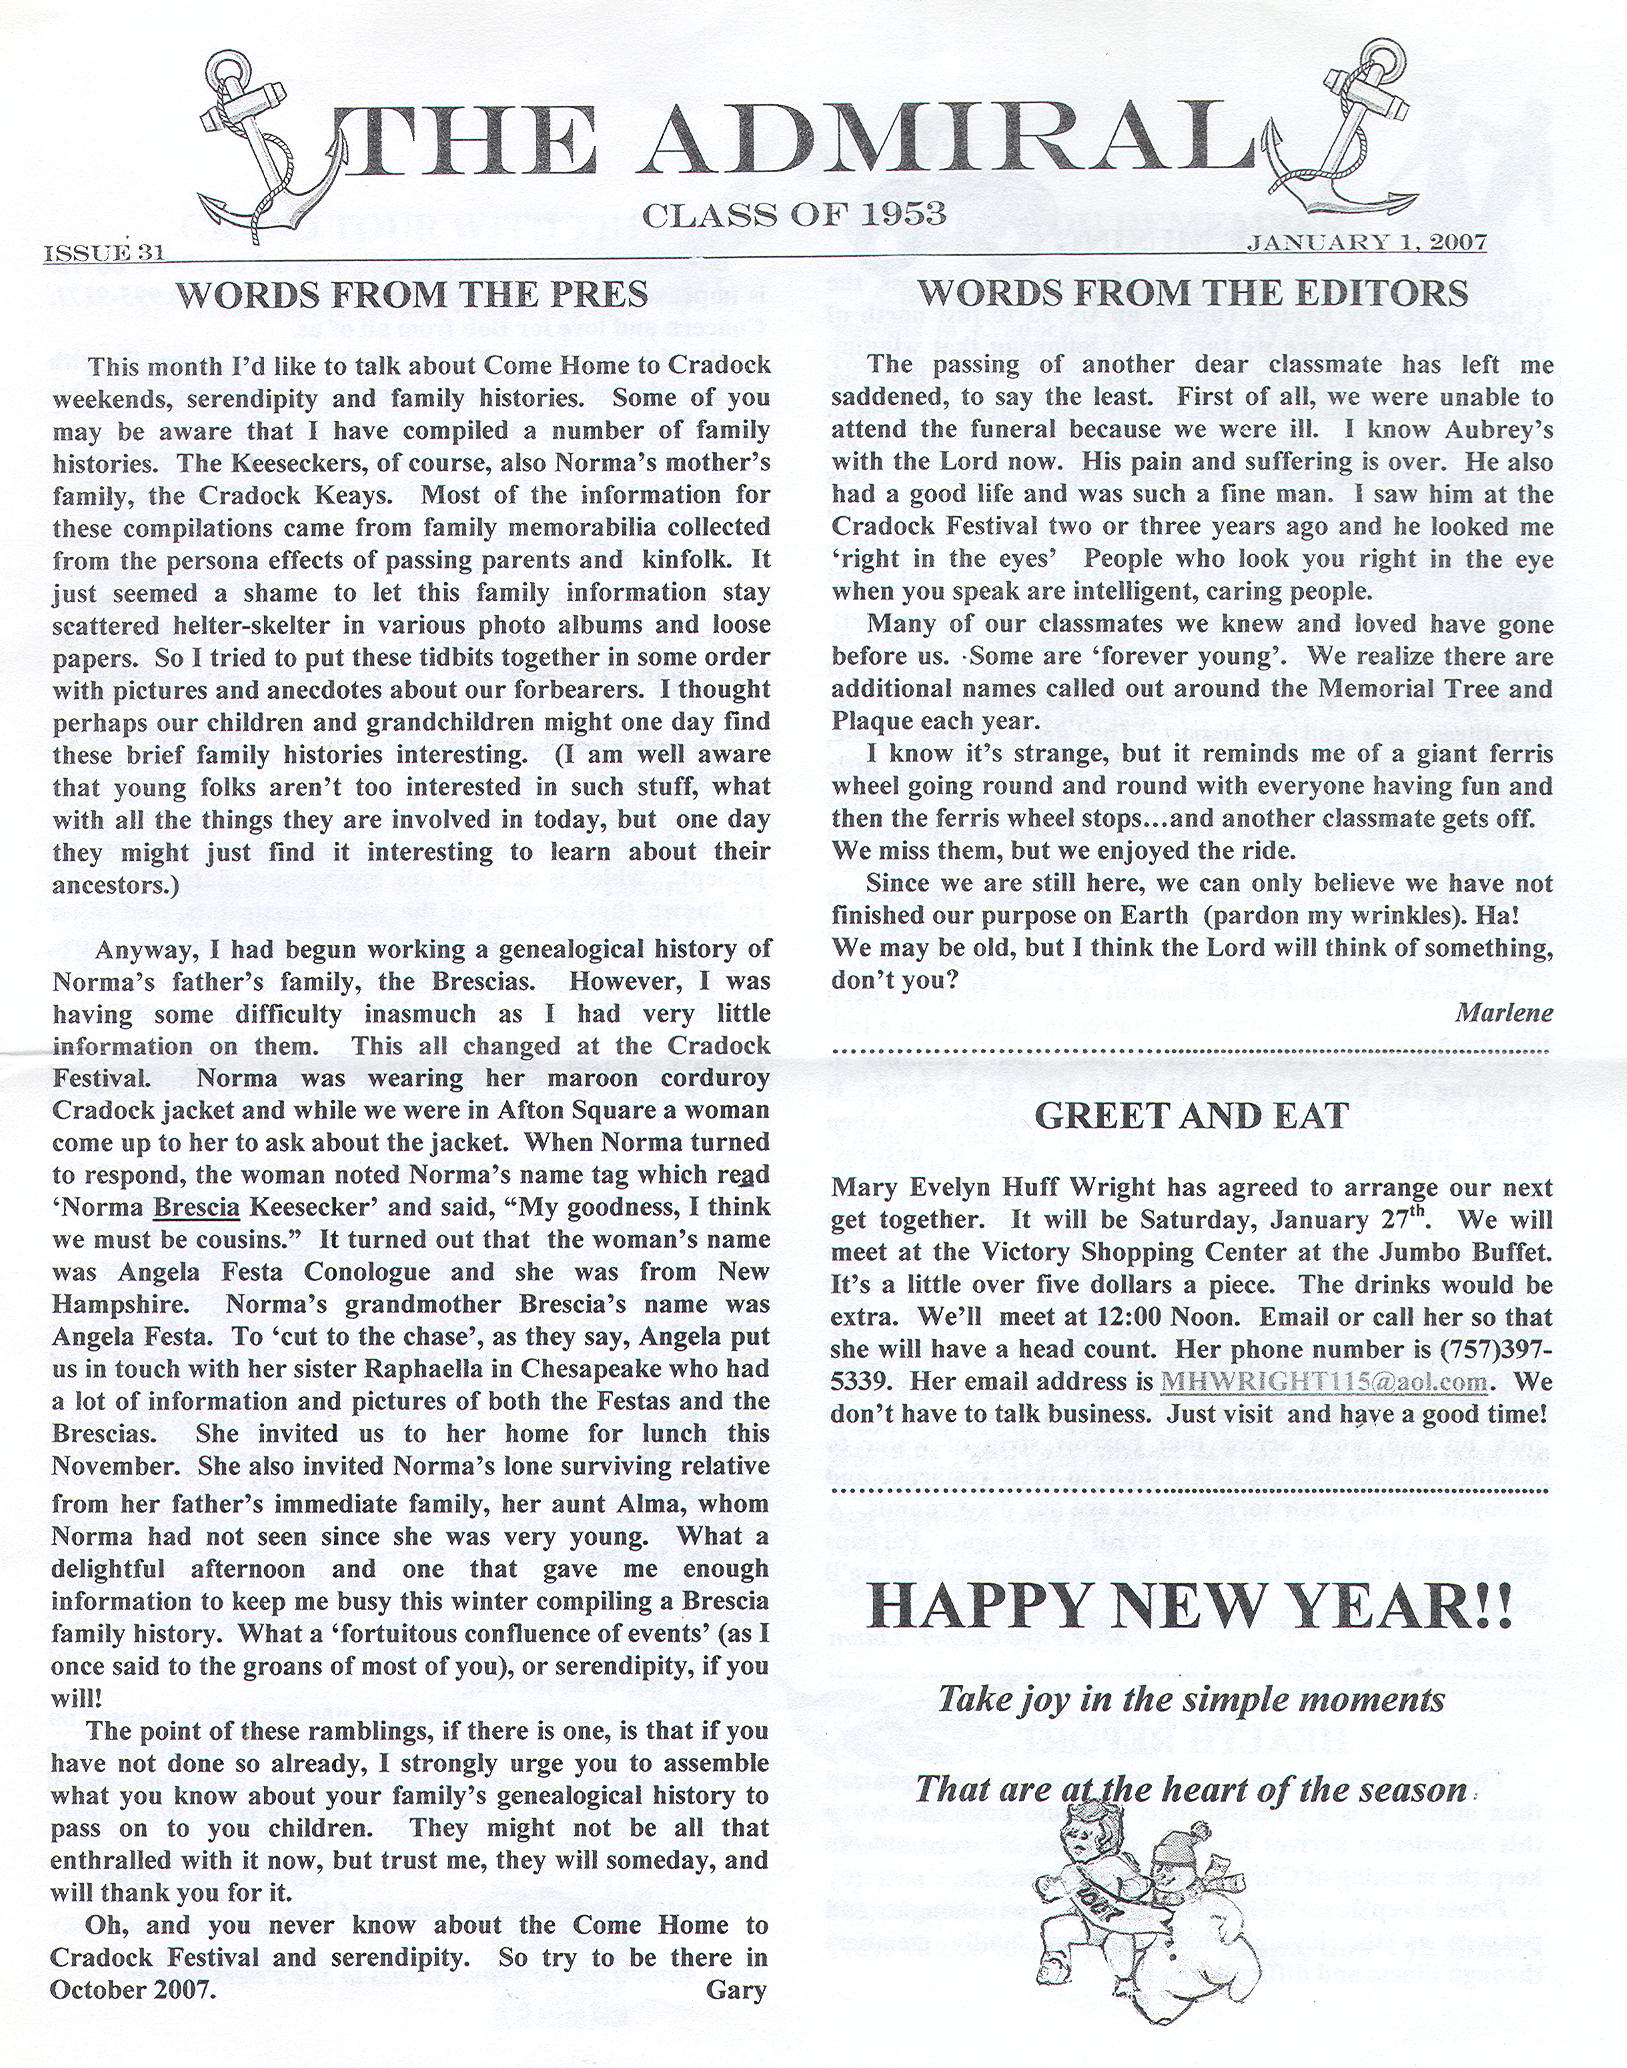 The Admiral - January 2007 - pg. 1